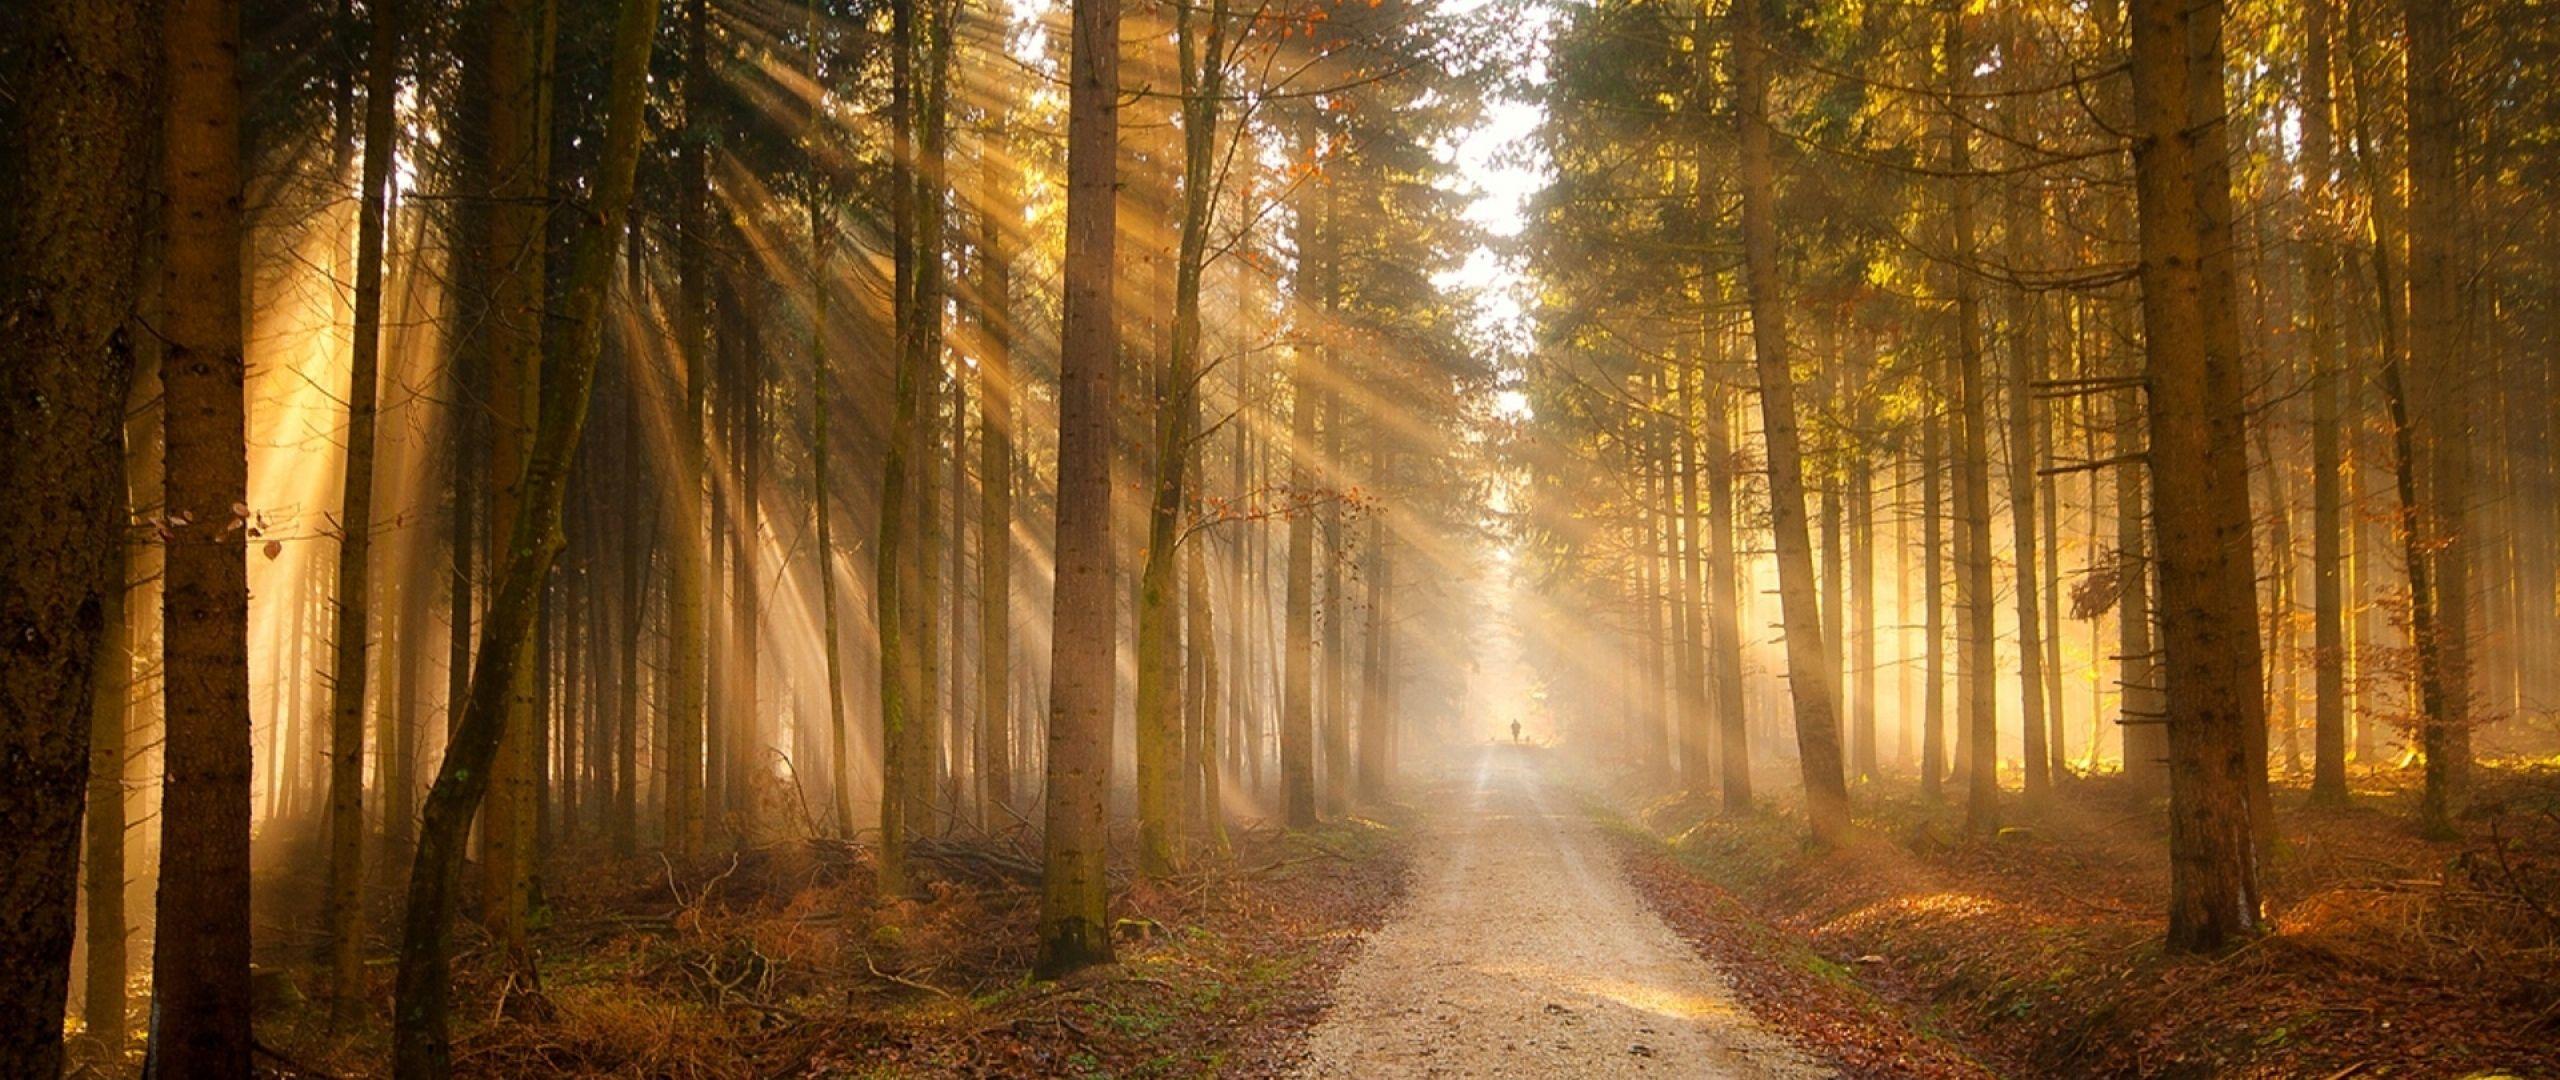 Download Wallpaper 2560x1080 Forest, Sun, Rays, Road, Trail